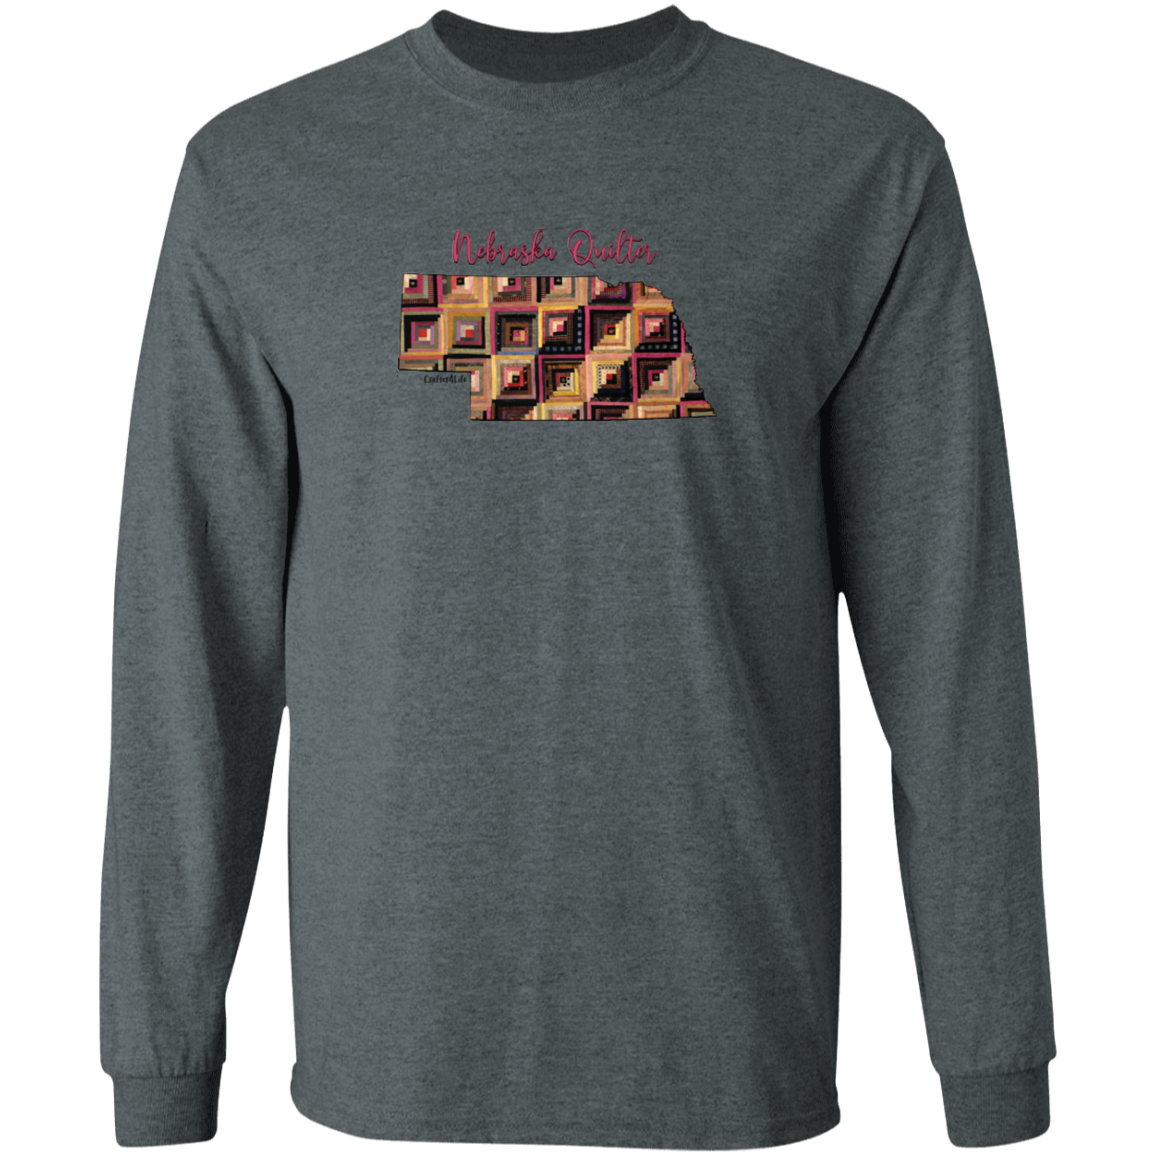 Nebraska Quilter Long Sleeve T-Shirt, Gift for Quilting Friends and Family